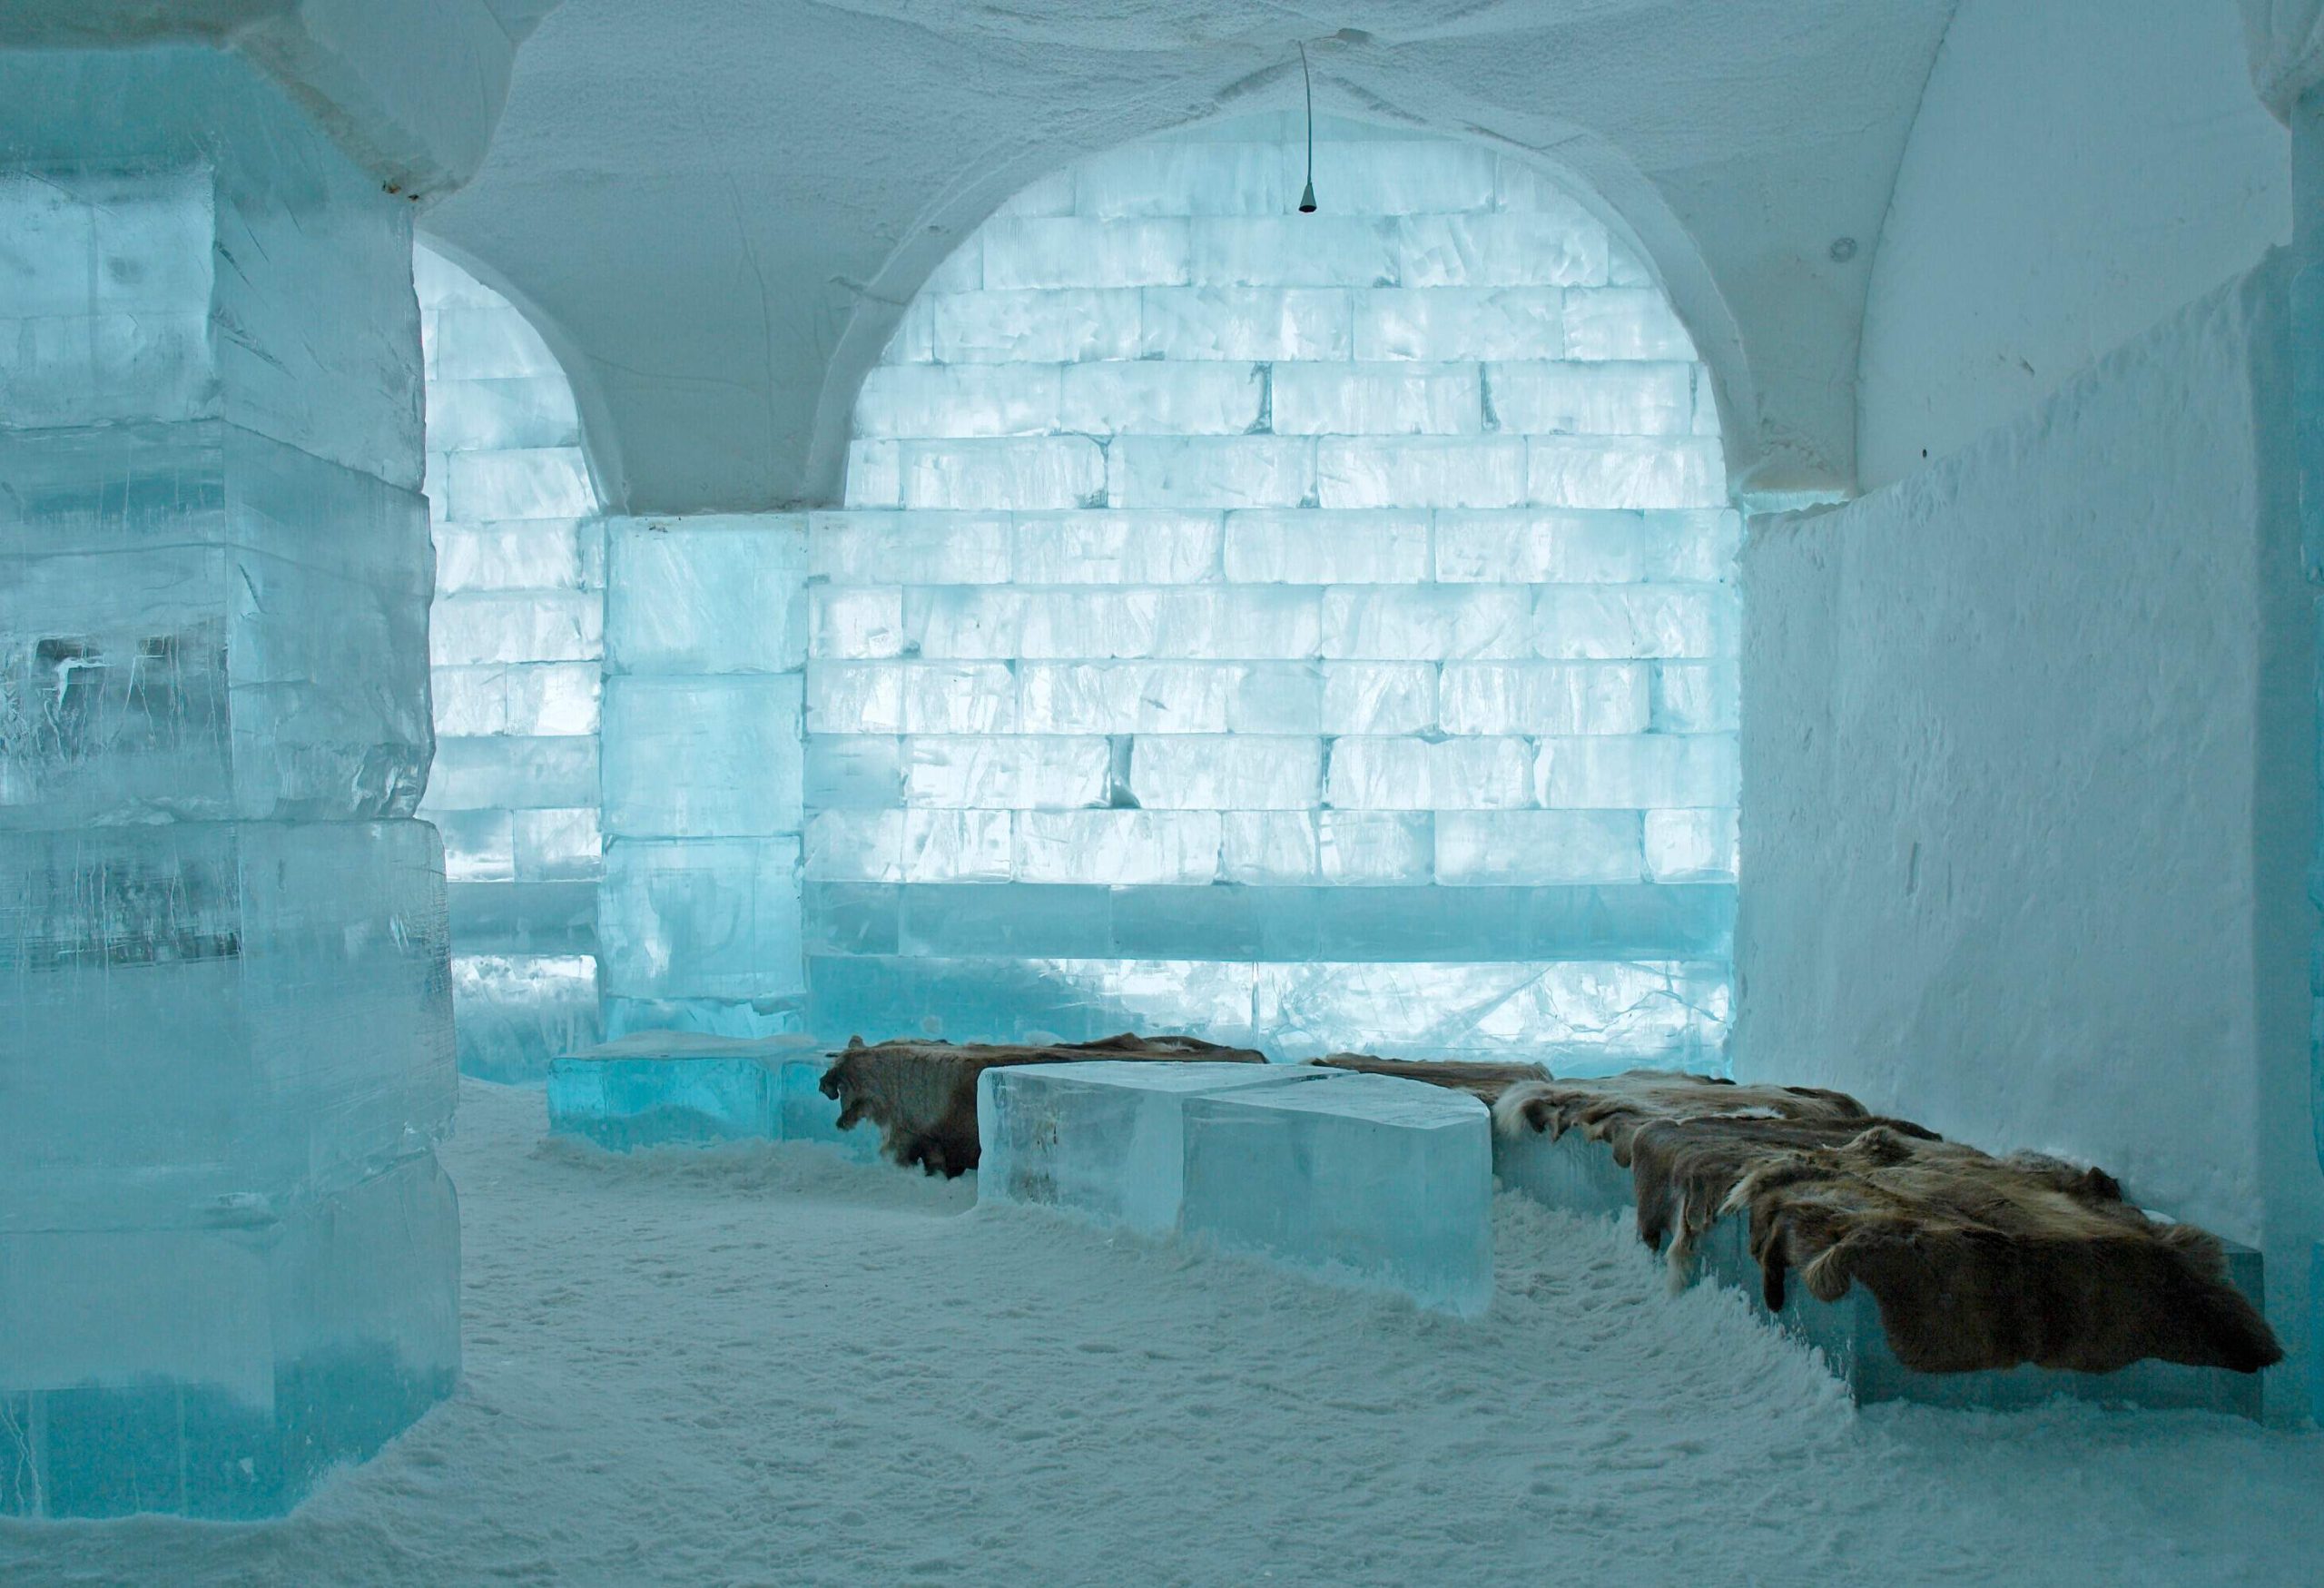 The inside of an ice hotel with intricate ice sculptures, beds and chairs made entirely of ice.